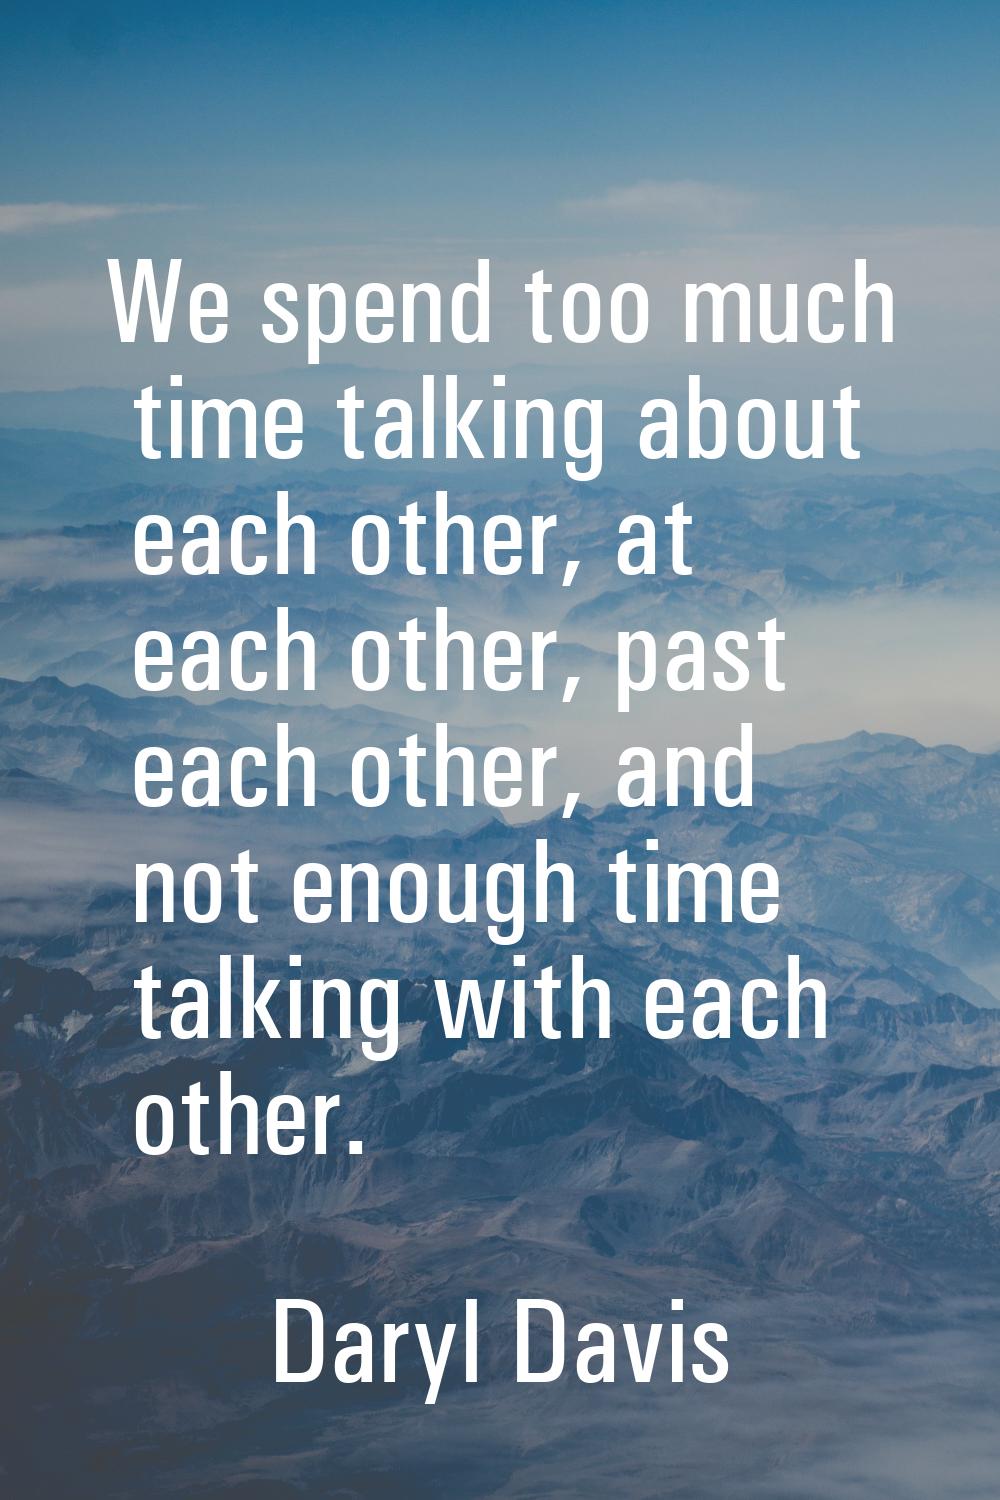 We spend too much time talking about each other, at each other, past each other, and not enough tim